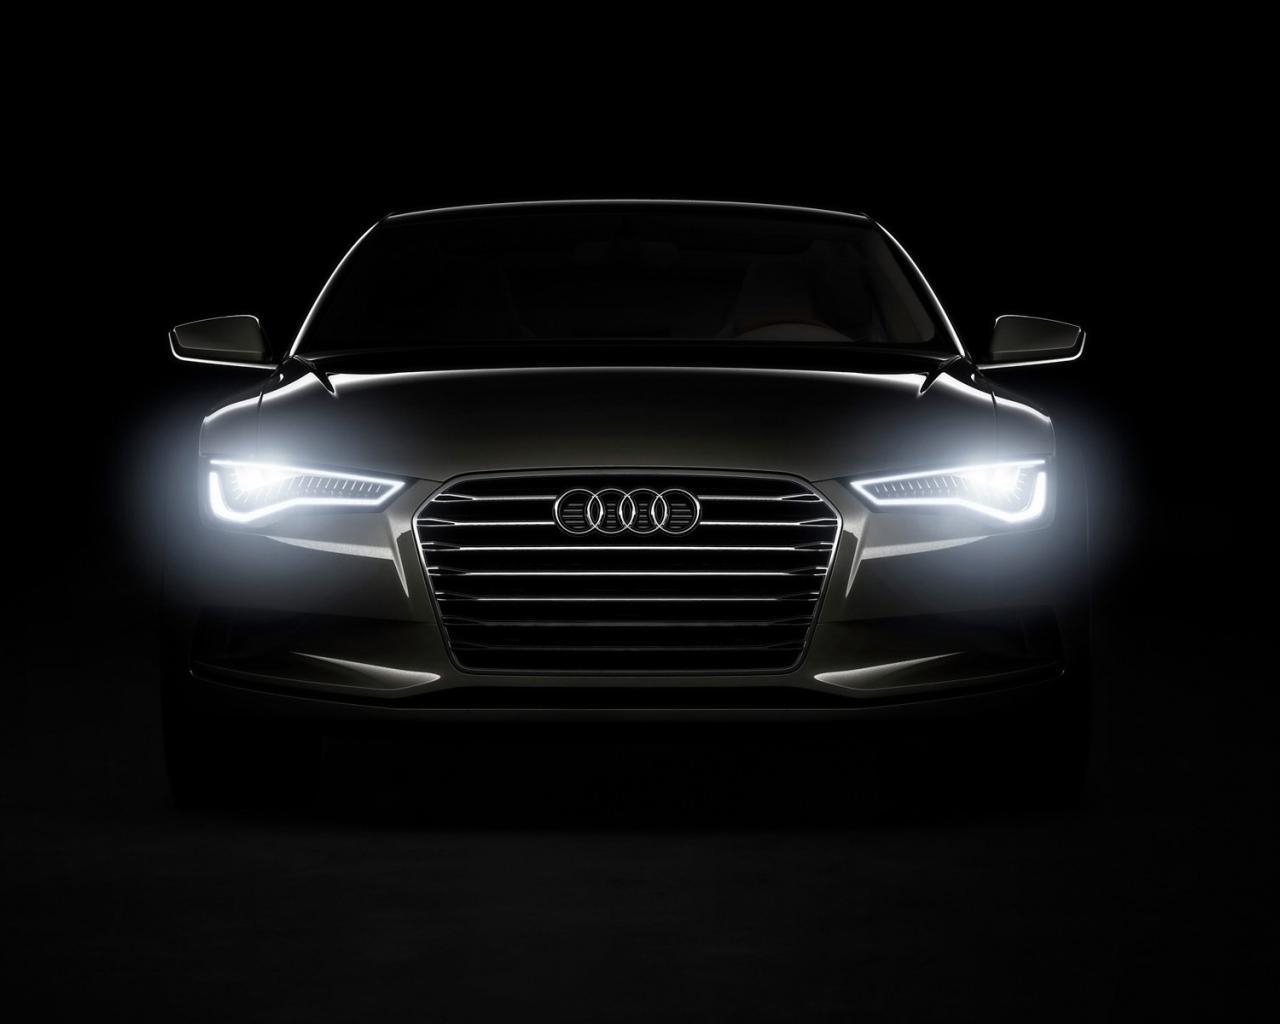 Audi A7 Headlights for 1280 x 1024 resolution